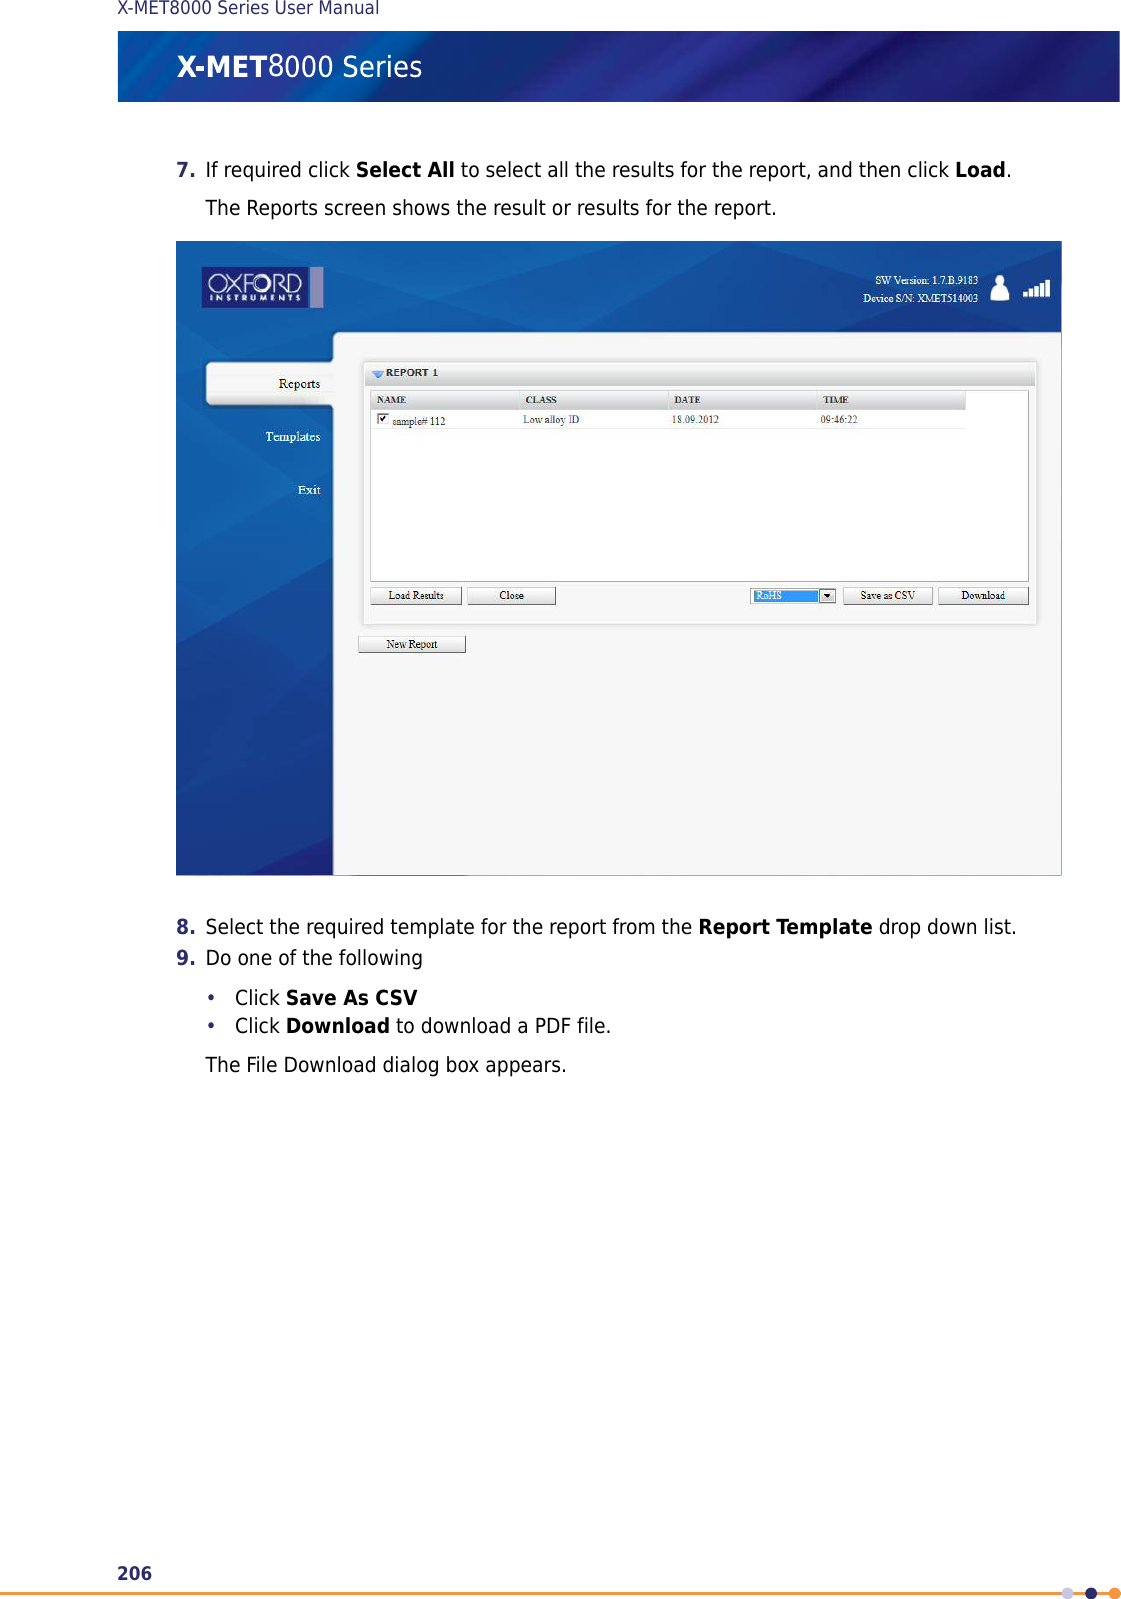 7. If required click Select All to select all the results for the report, and then click Load.The Reports screen shows the result or results for the report.8. Select the required template for the report from the Report Template drop down list.9. Do one of the following•Click Save As CSV•Click Download to download a PDF file.The File Download dialog box appears.206X-MET8000 Series User Manual8